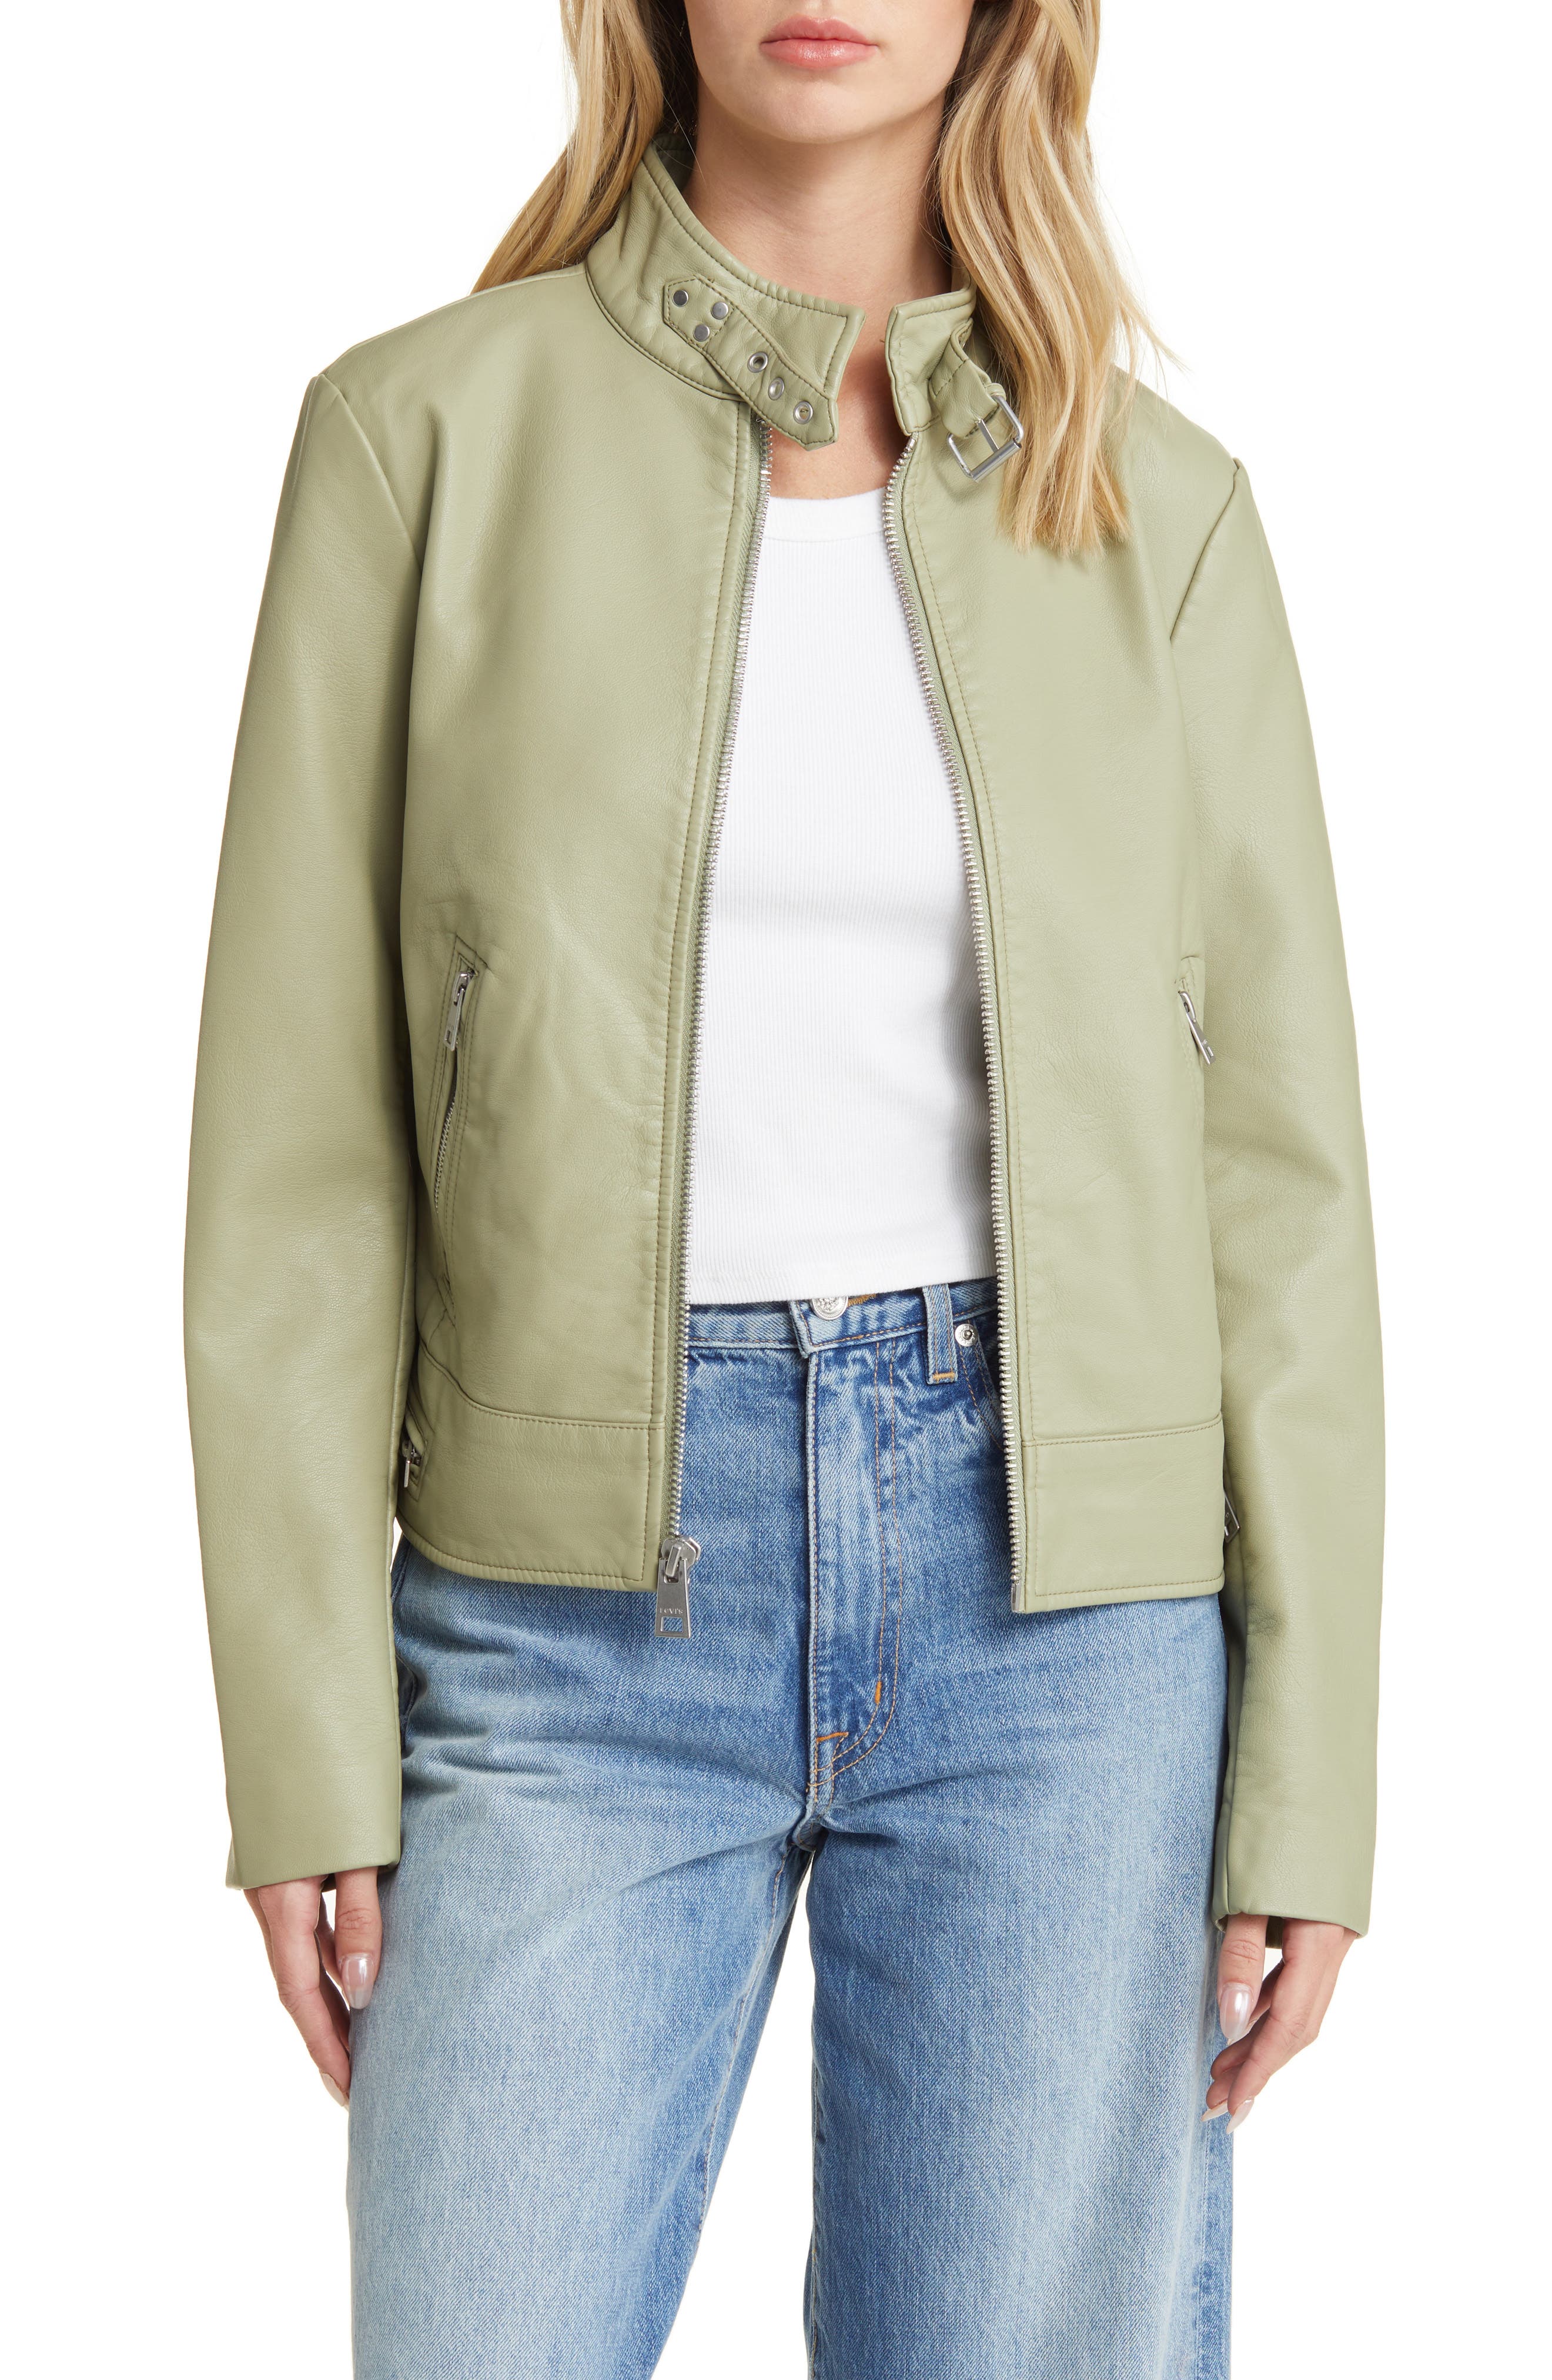 Drome button-down leather jacket - Green